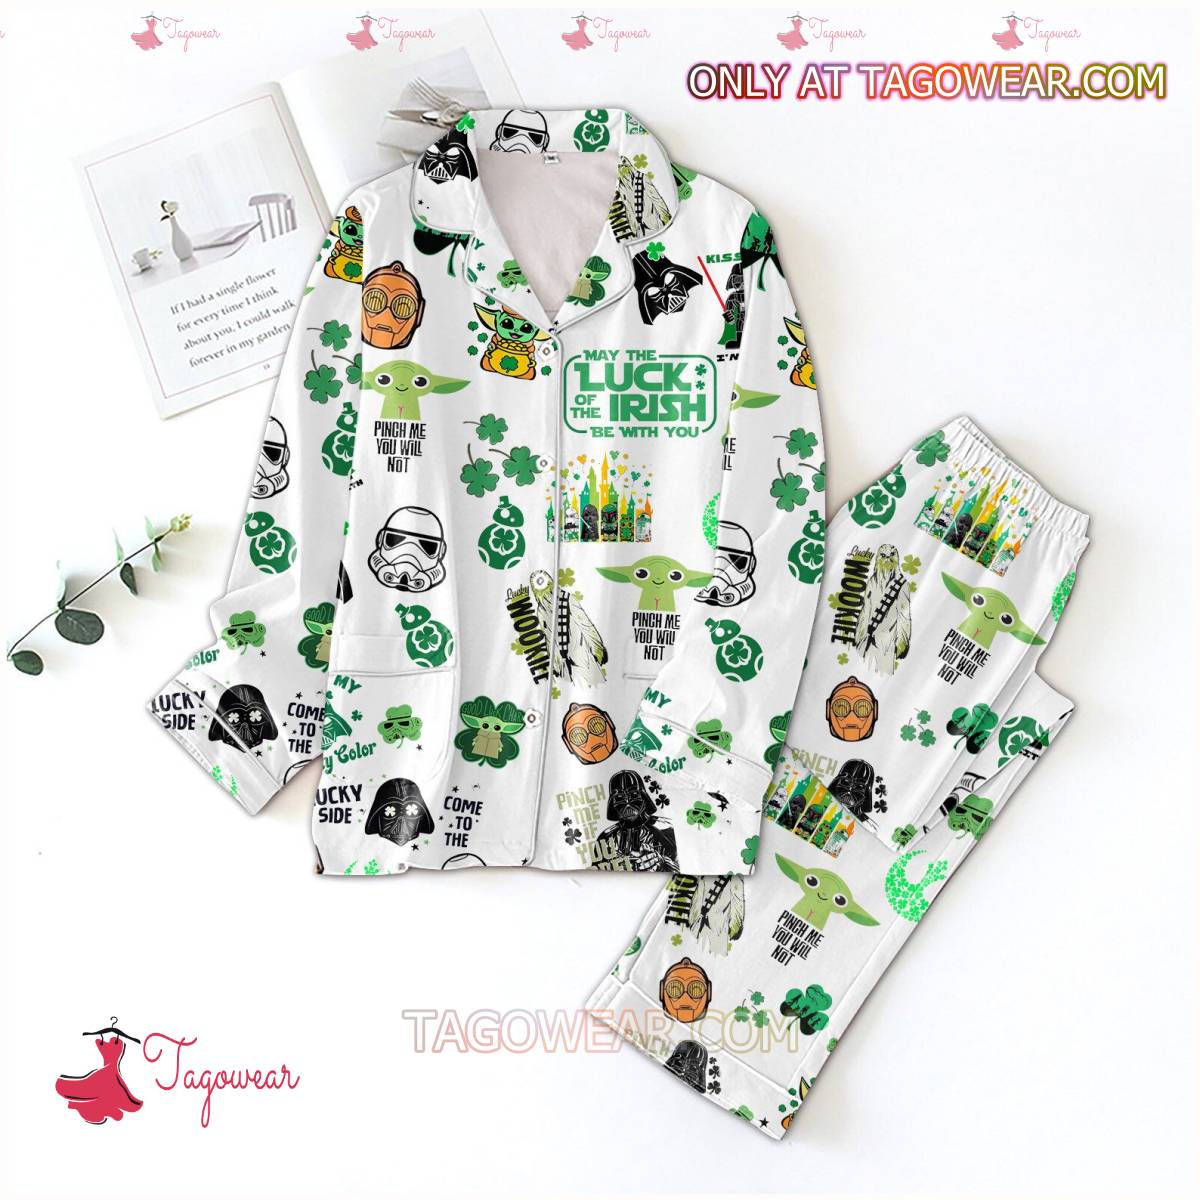 Star Wars May The Luck Of The Irish Be With You Men Women's Pajamas Set